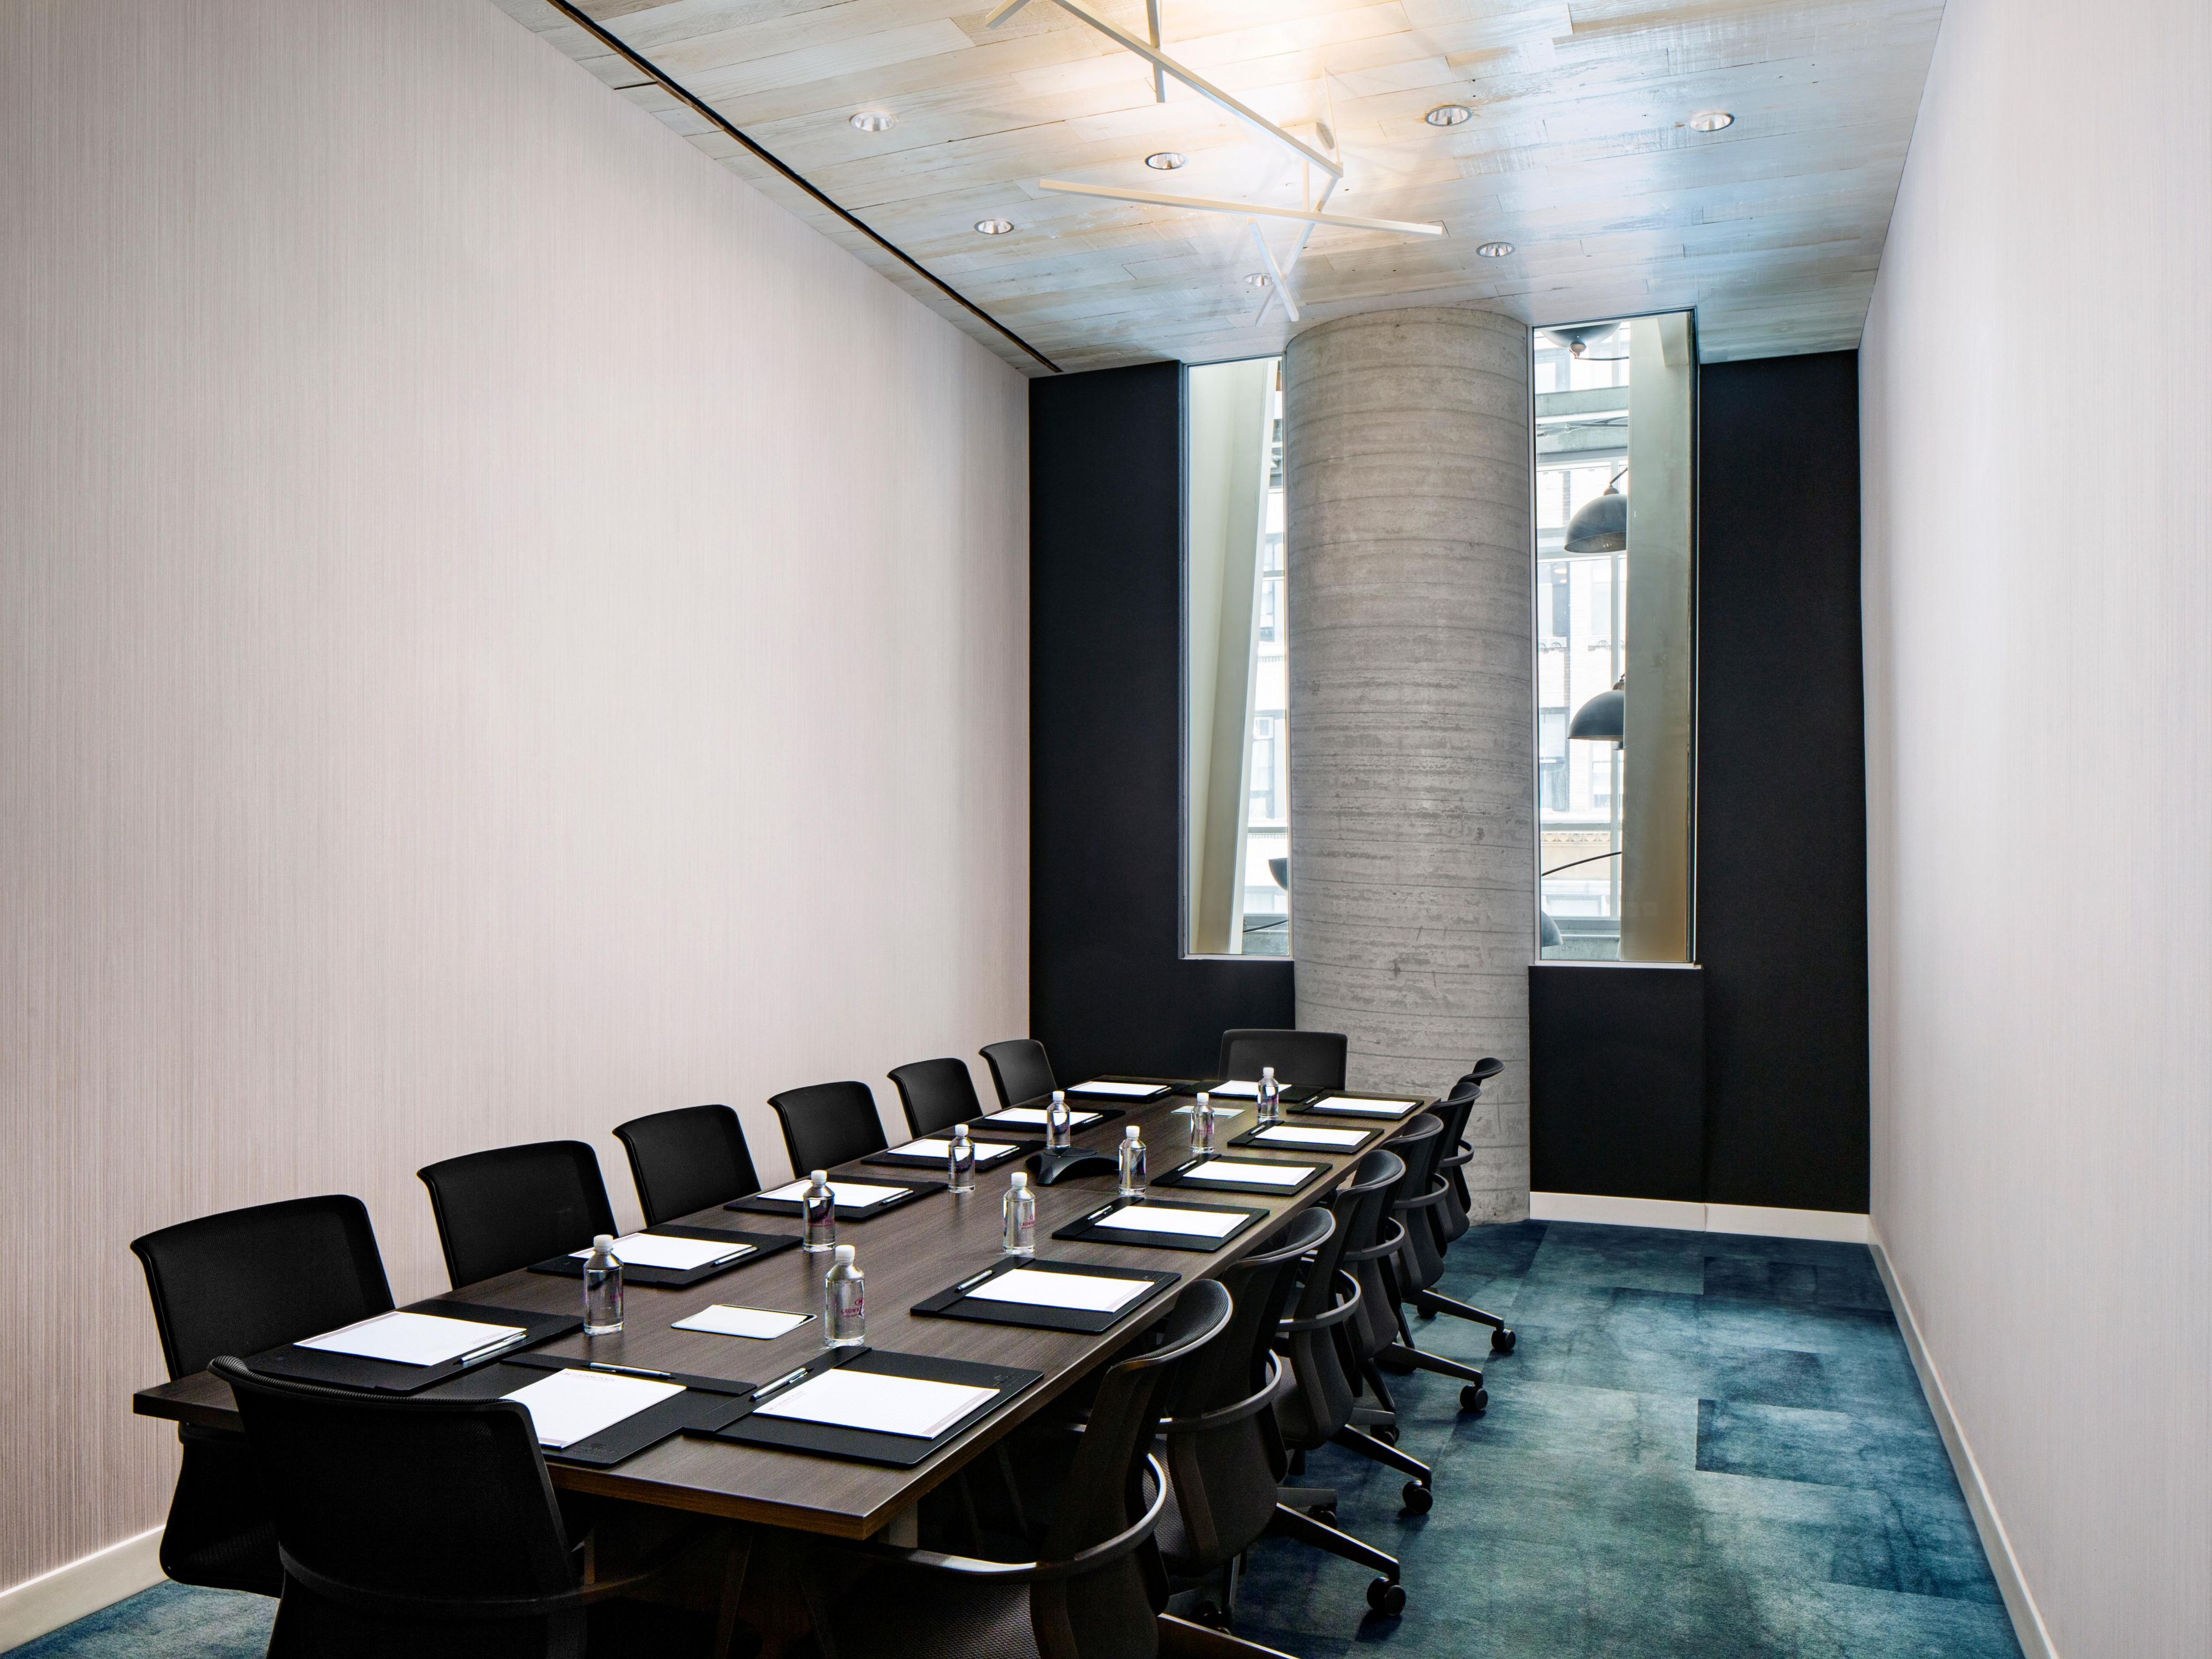 Our dedicated board room, Midtown can accommodate up to 14 guests.  High ceilings, natural light, plug and play technology and our dedicated Meeting Director will ensure that your next event exceeds your expectations.  Check our offers page for any current promotions and book with us today.